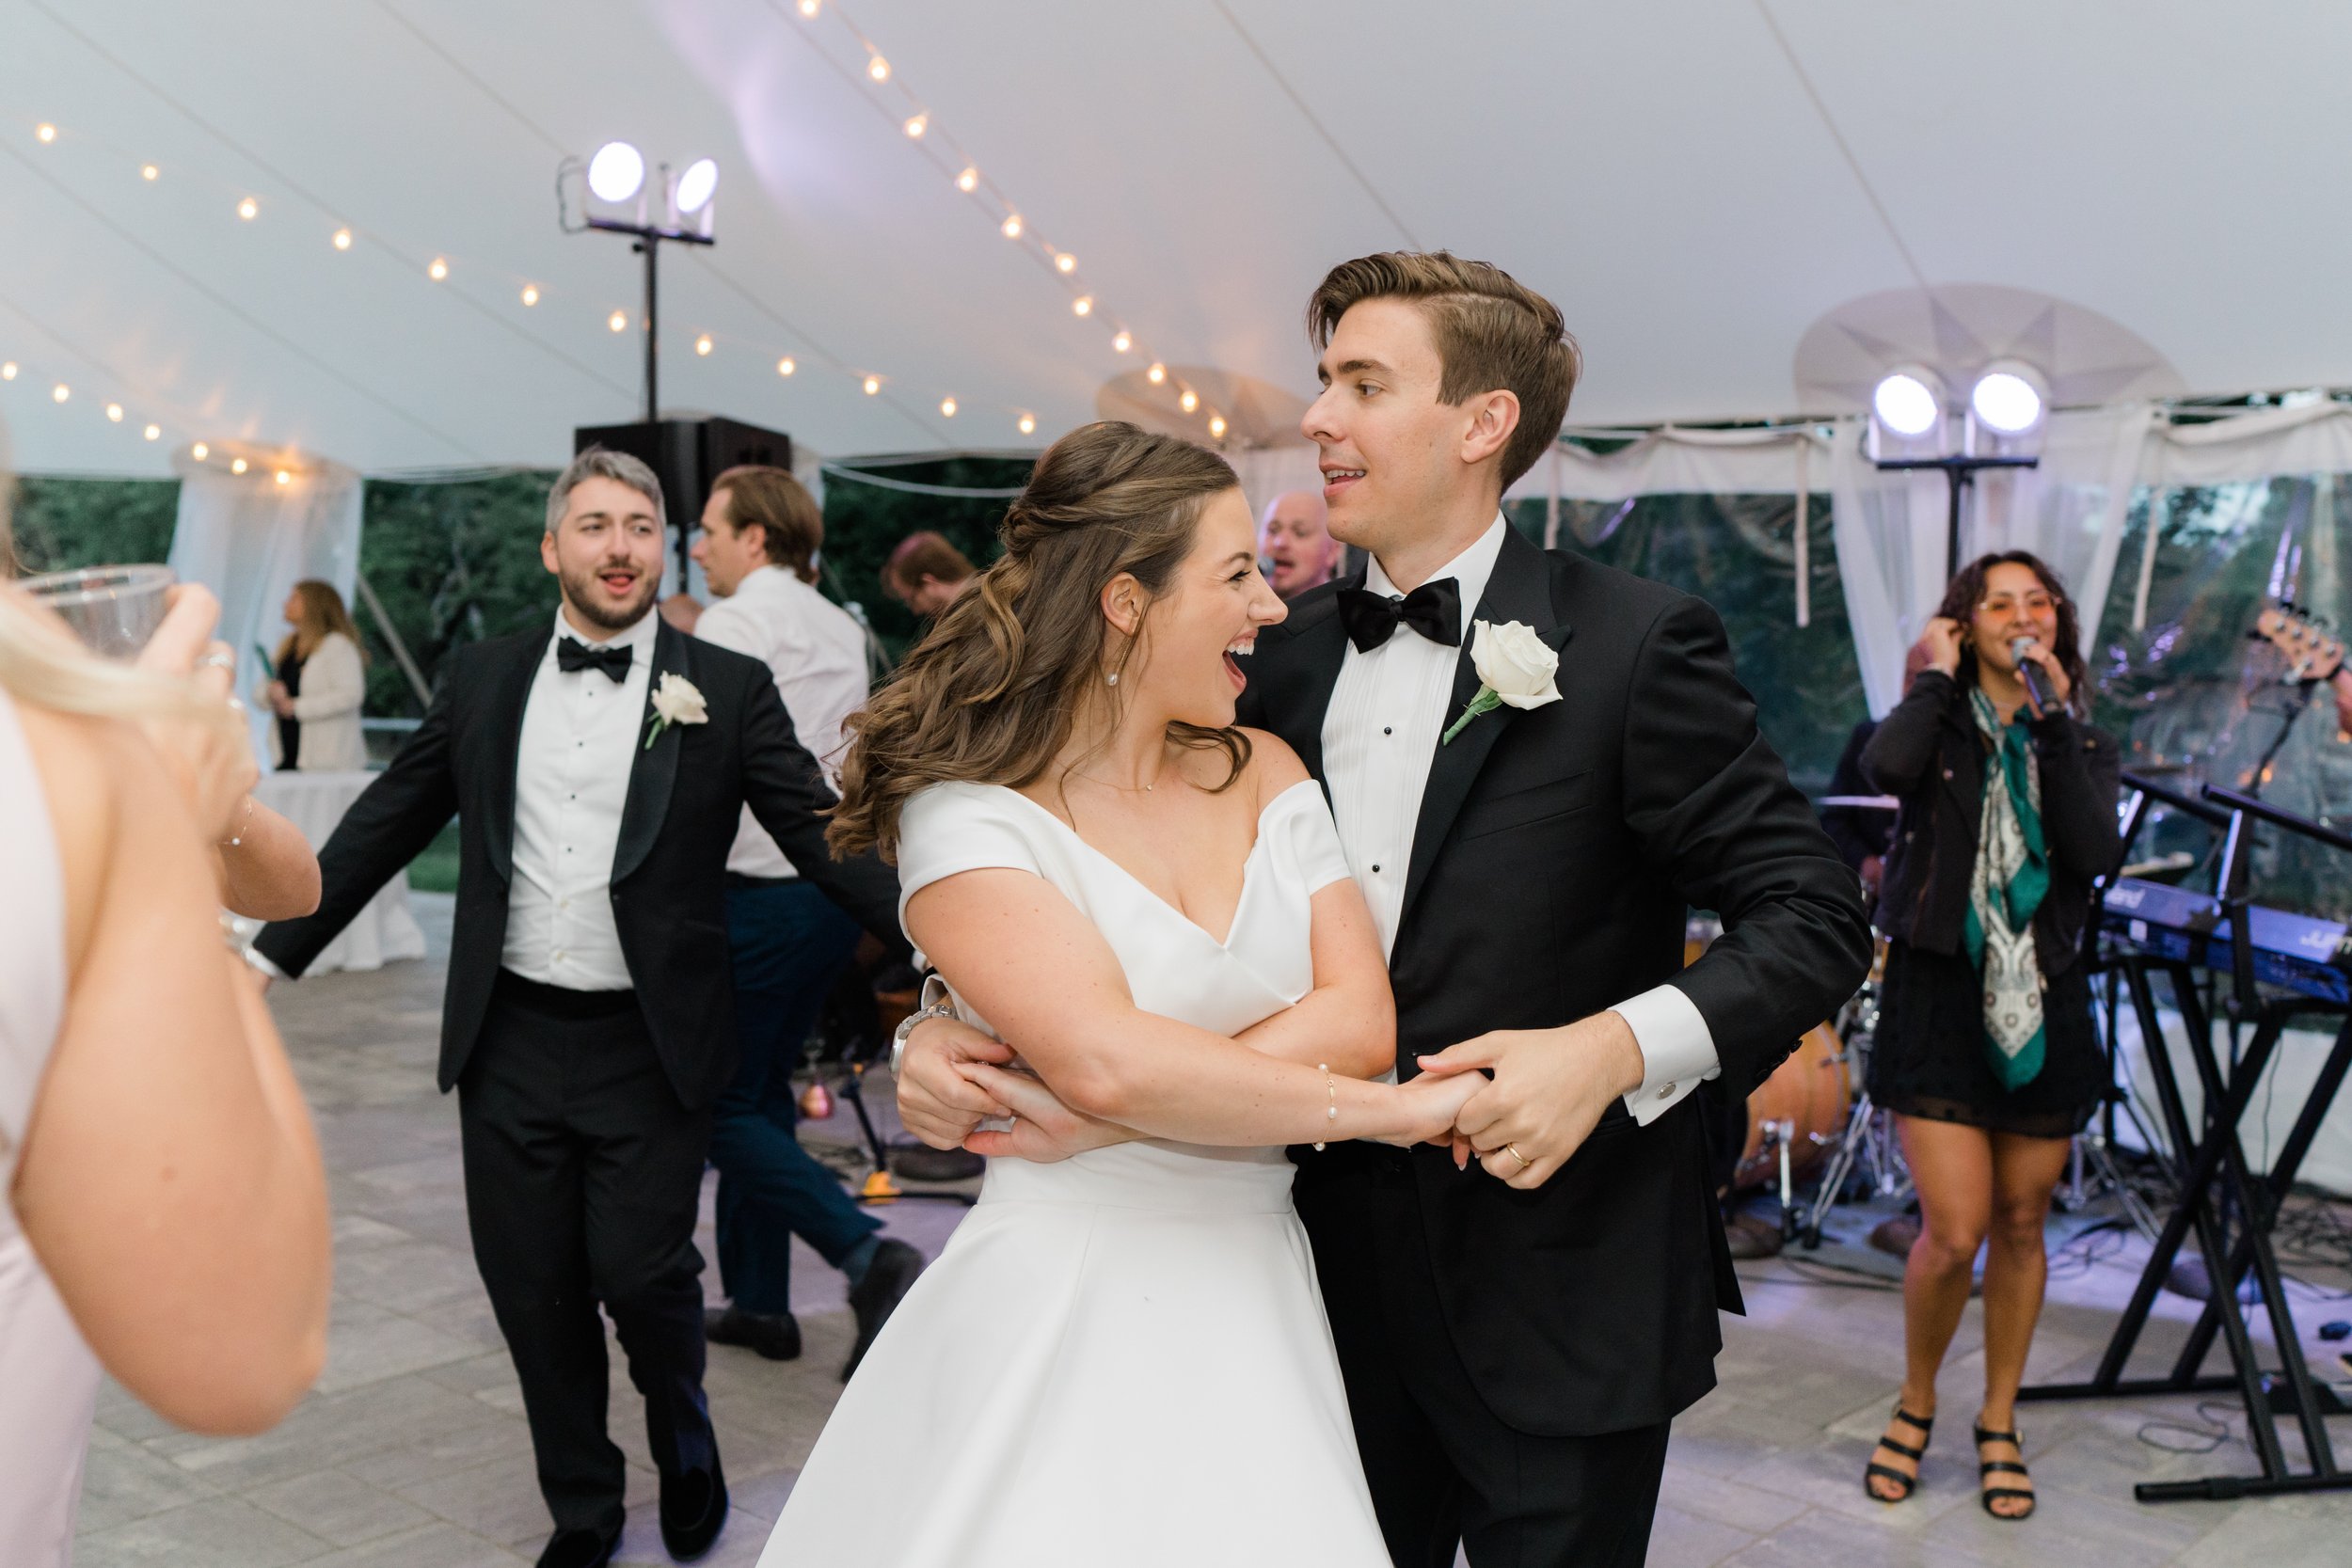 get the party started with bride and groom at outdoor wedding reception in Boston.